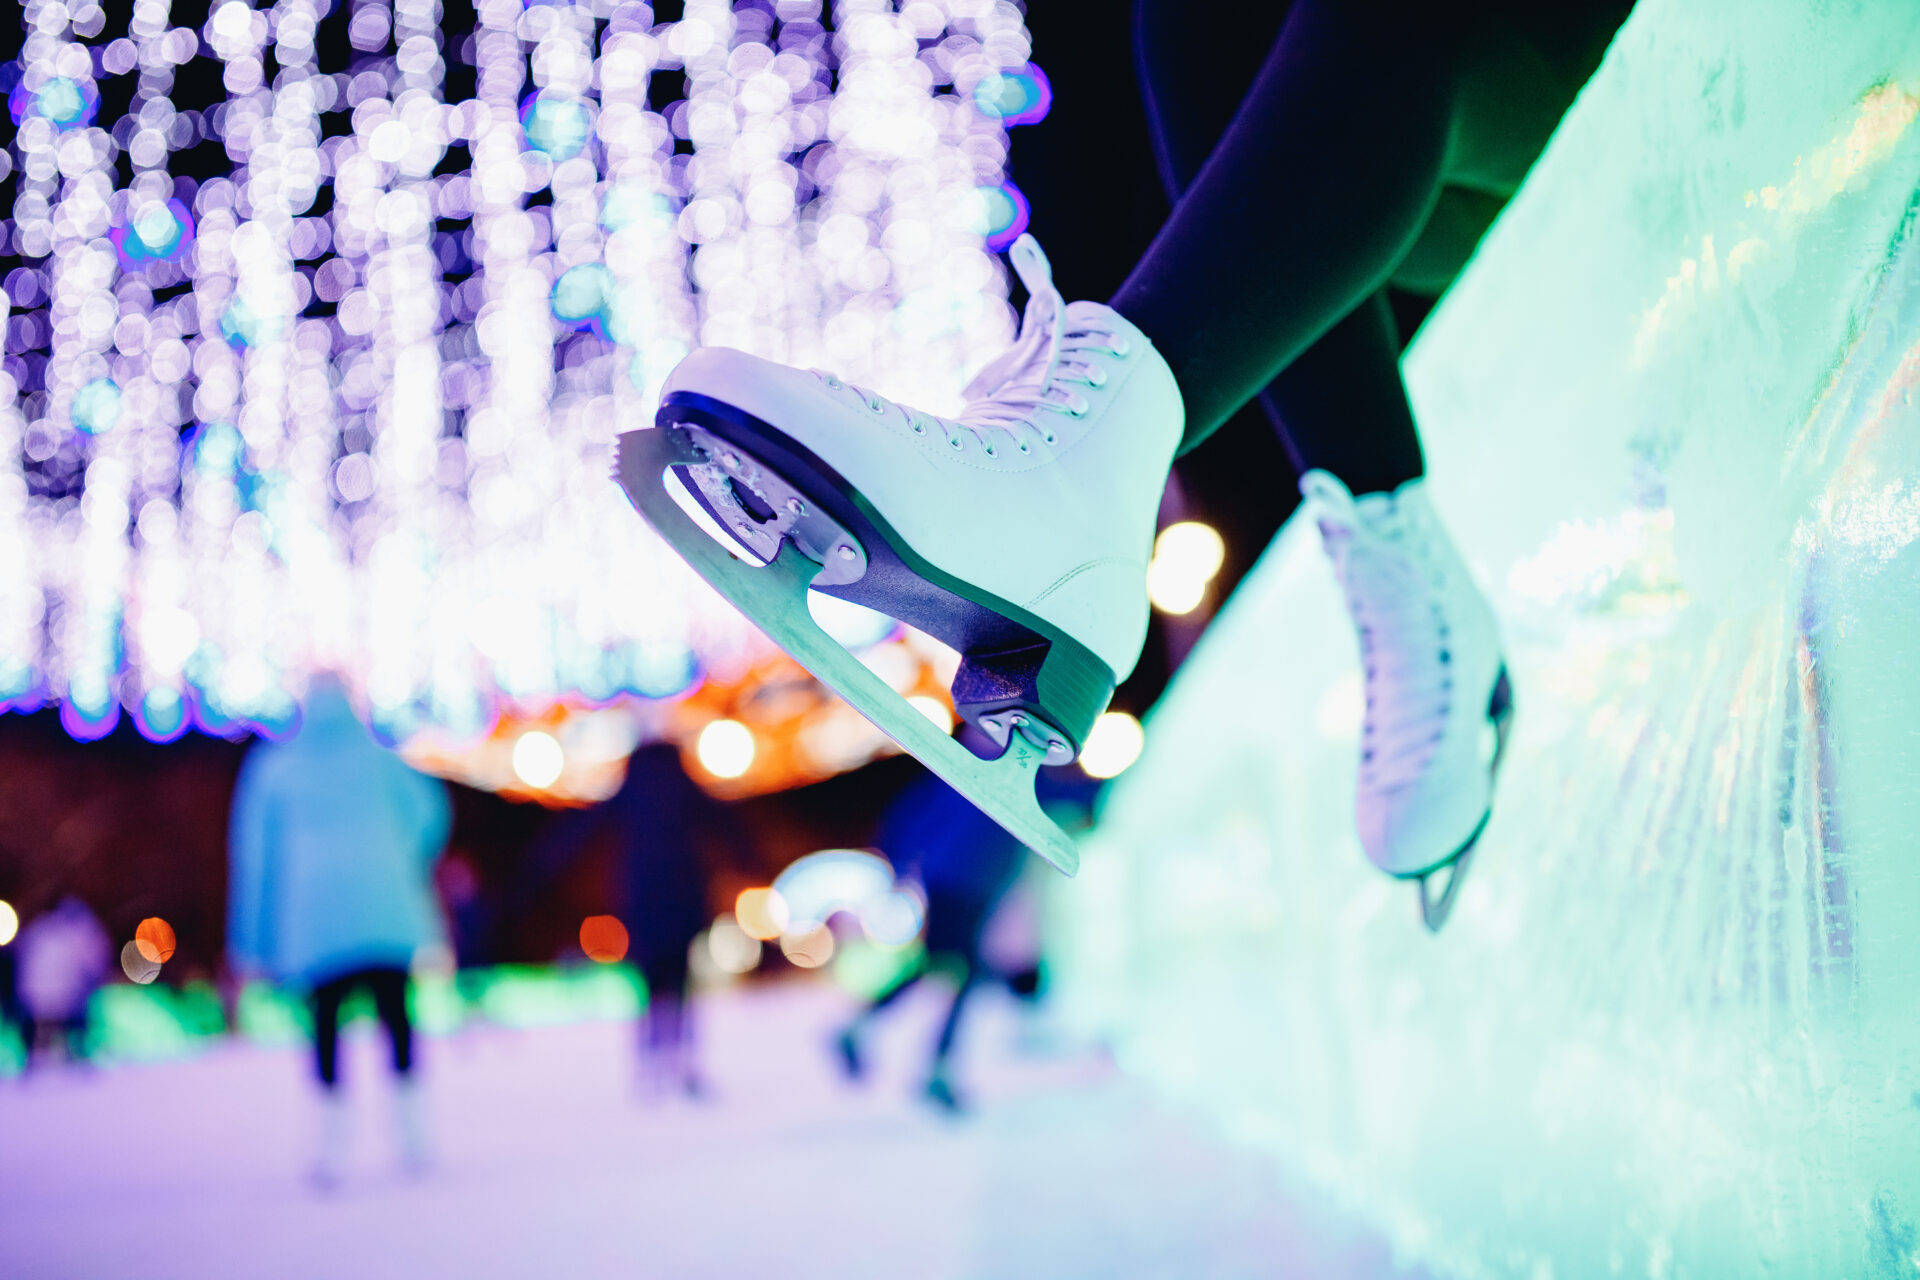 Caption: Grace on Ice: A Pair of White Ice Skating Shoes Wallpaper